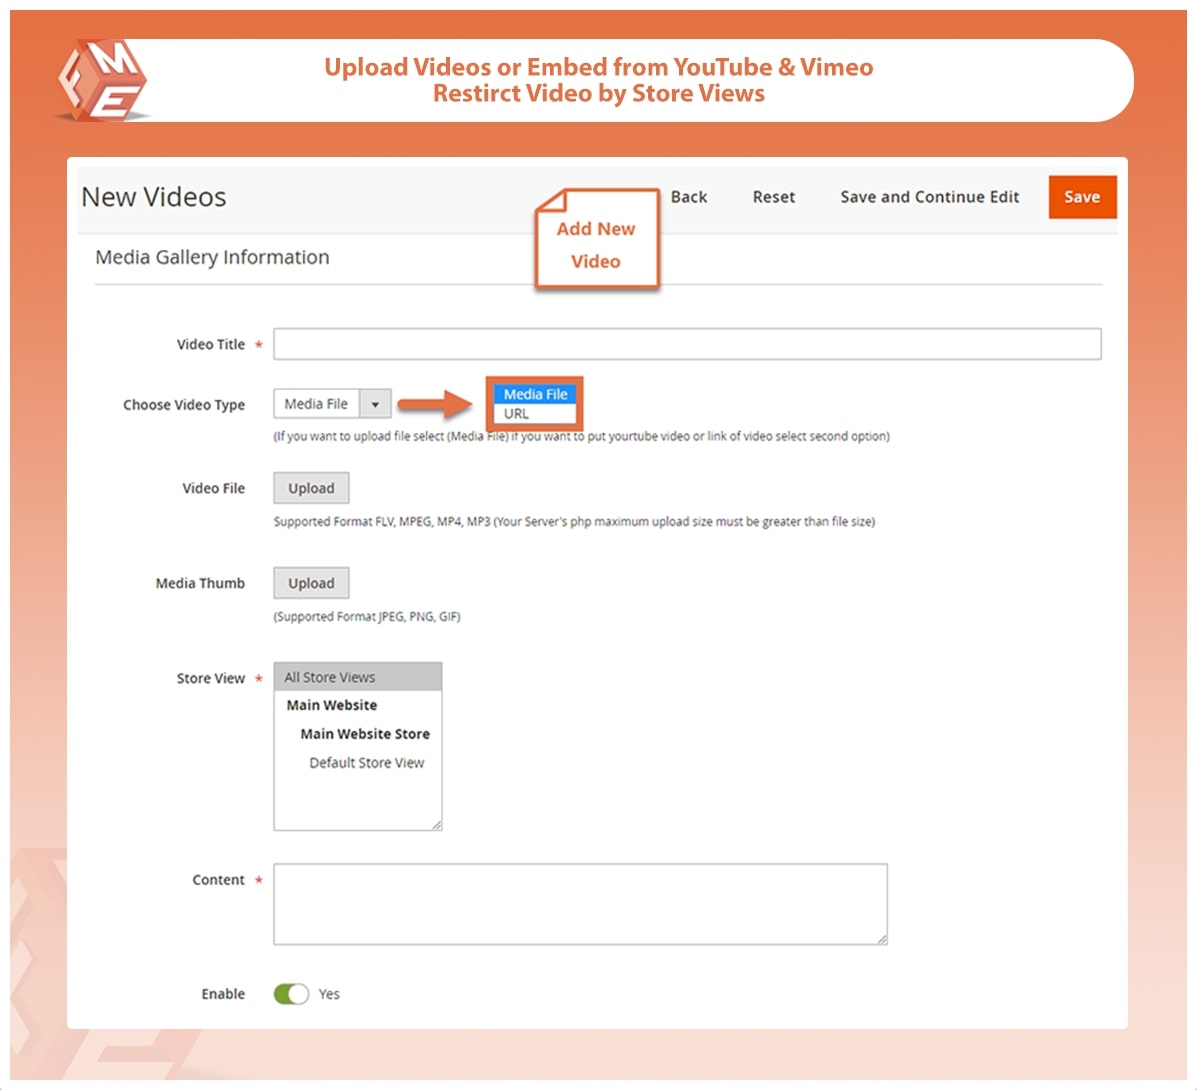 Add/Upload Videos From YouTube & Vimeo